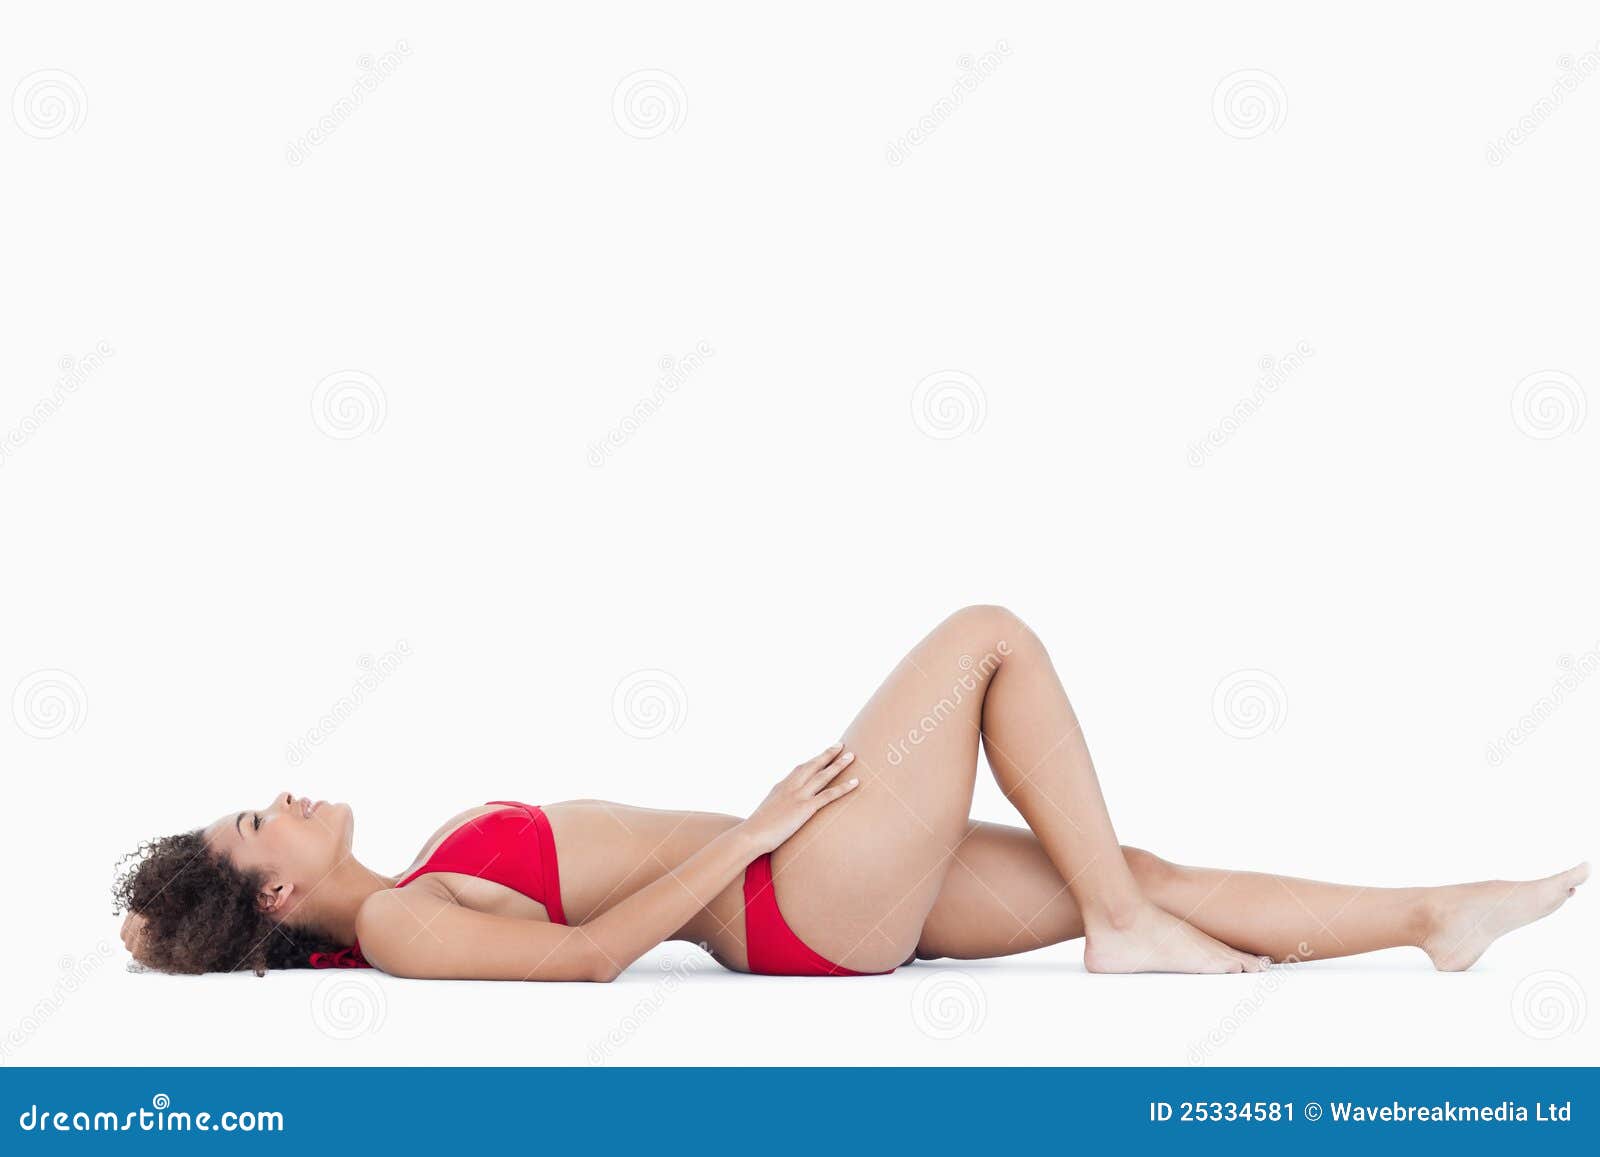 attractive-woman-swimsuit-lying-down-253